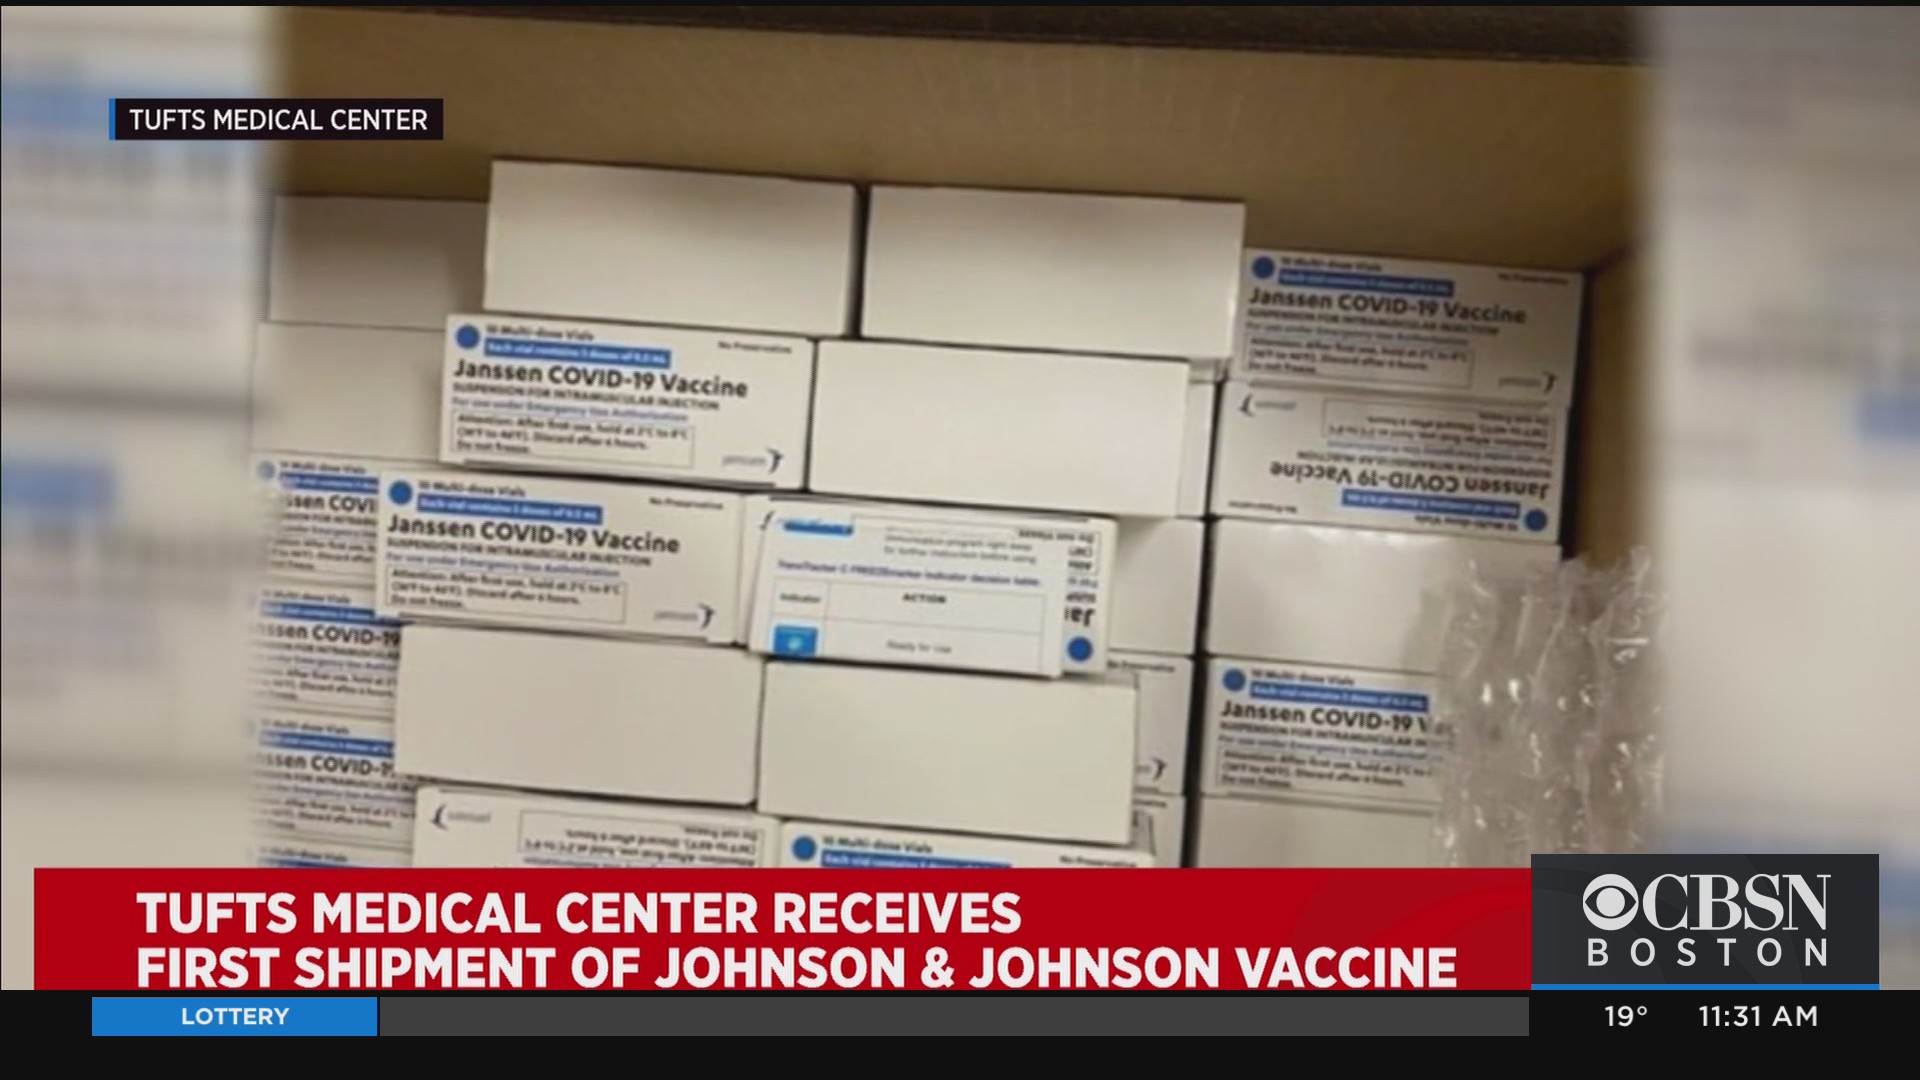 Tufts Medical Center Receives First Shipment Of Johnson & Johnson Vaccine